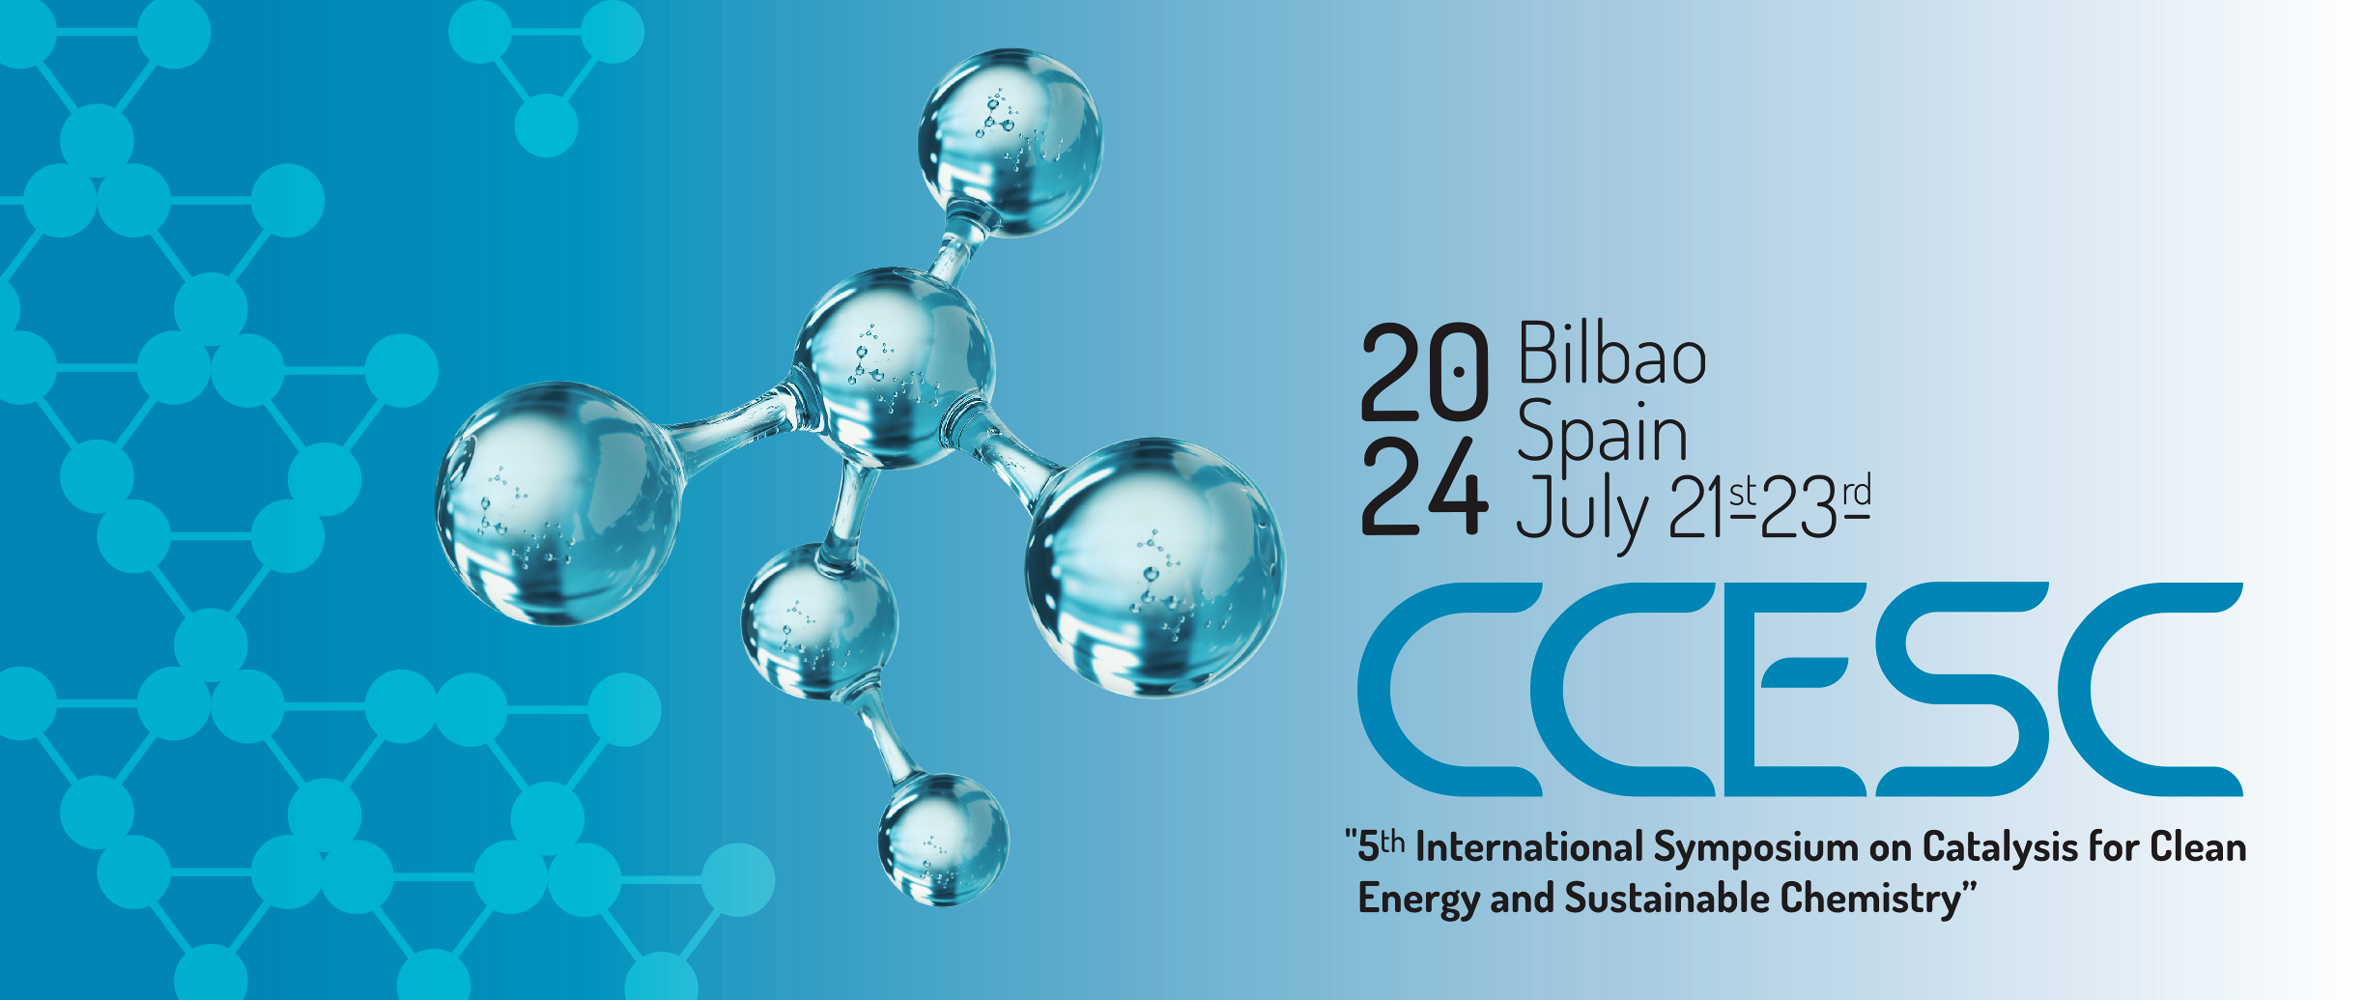 5th International Symposium on Catalysis for Clean Energy and Sustainable Chemistry